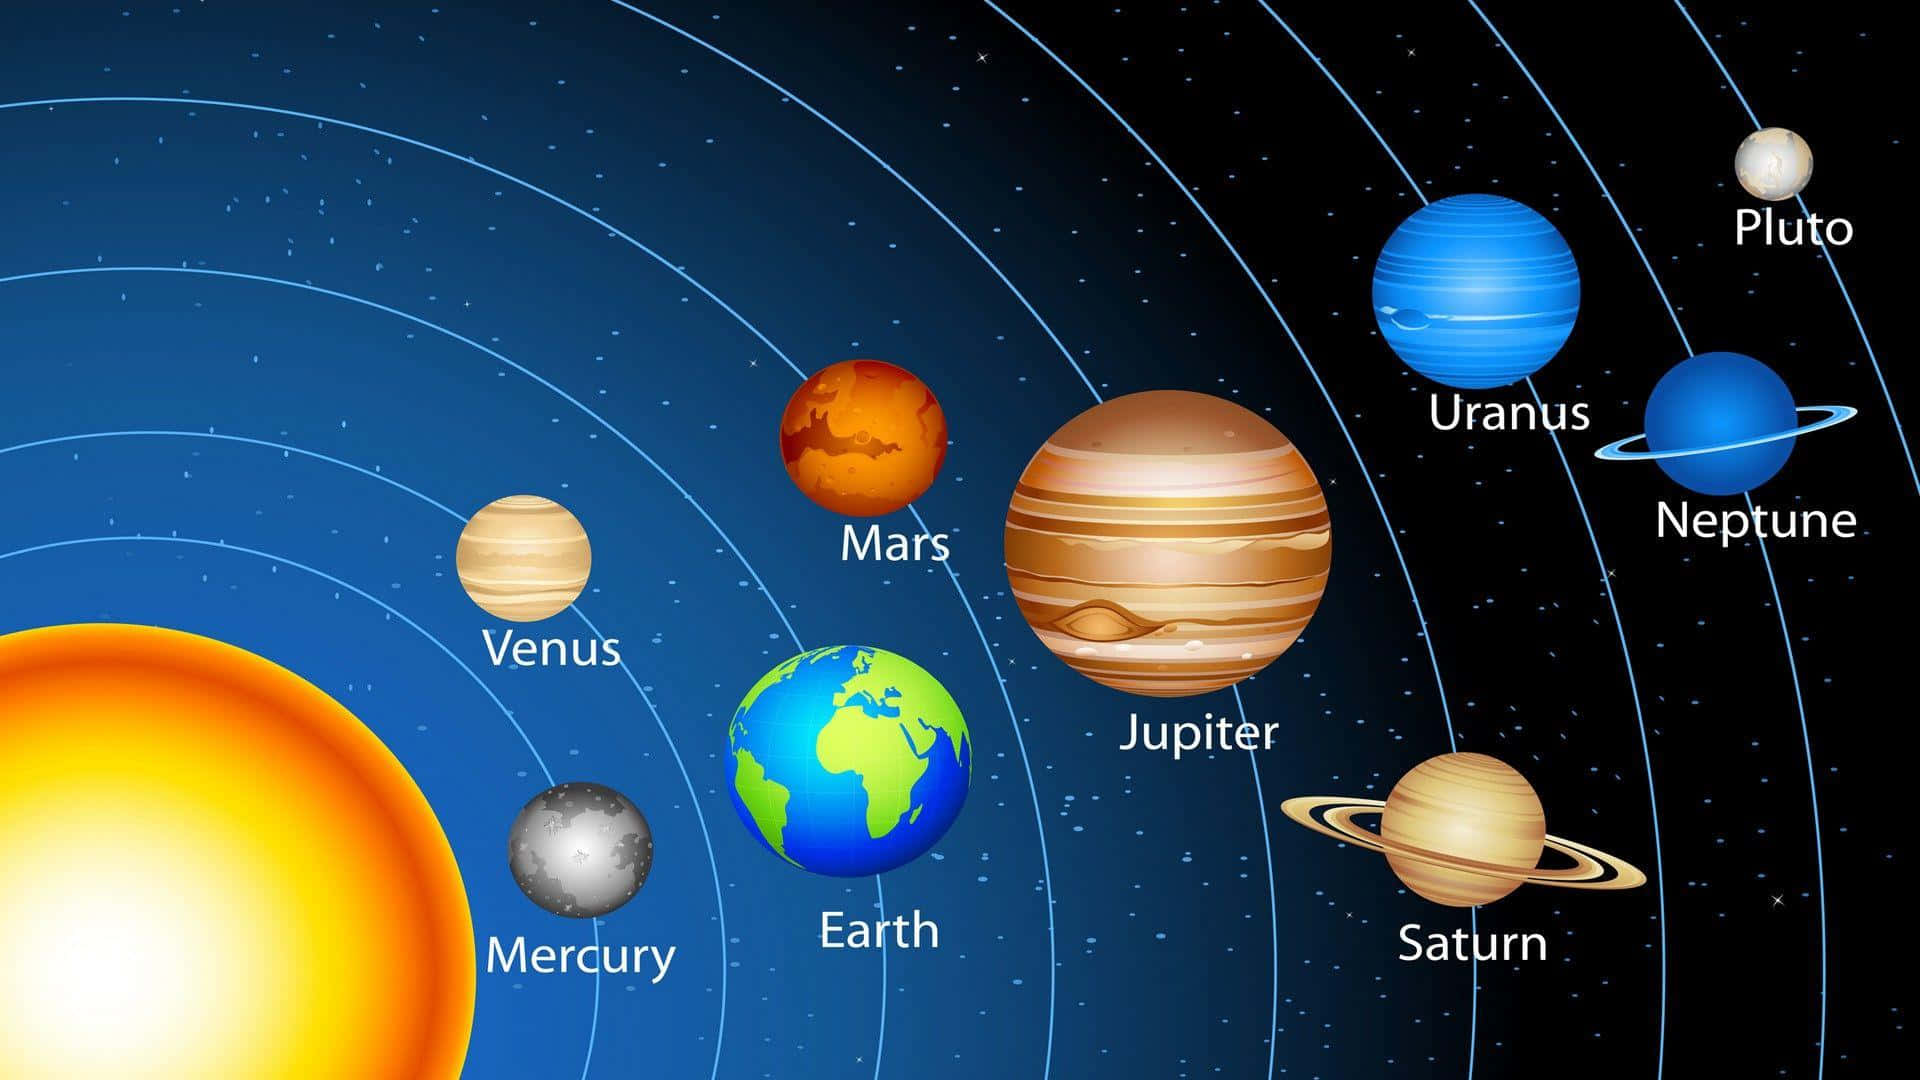 Learning The Solar System Wallpaper